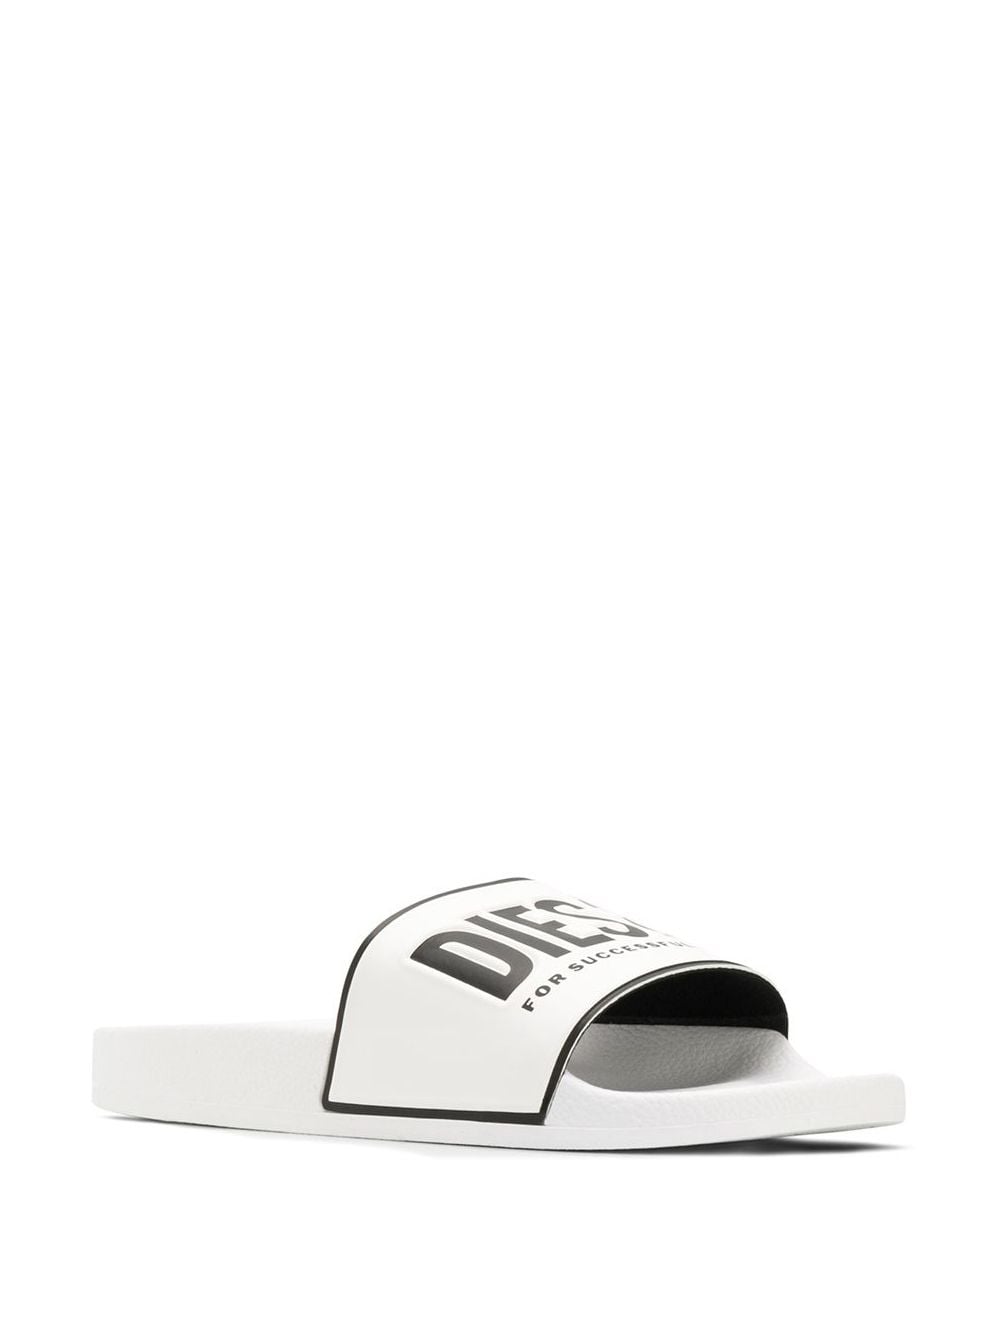 Shop Diesel logo slides with Express Delivery - FARFETCH